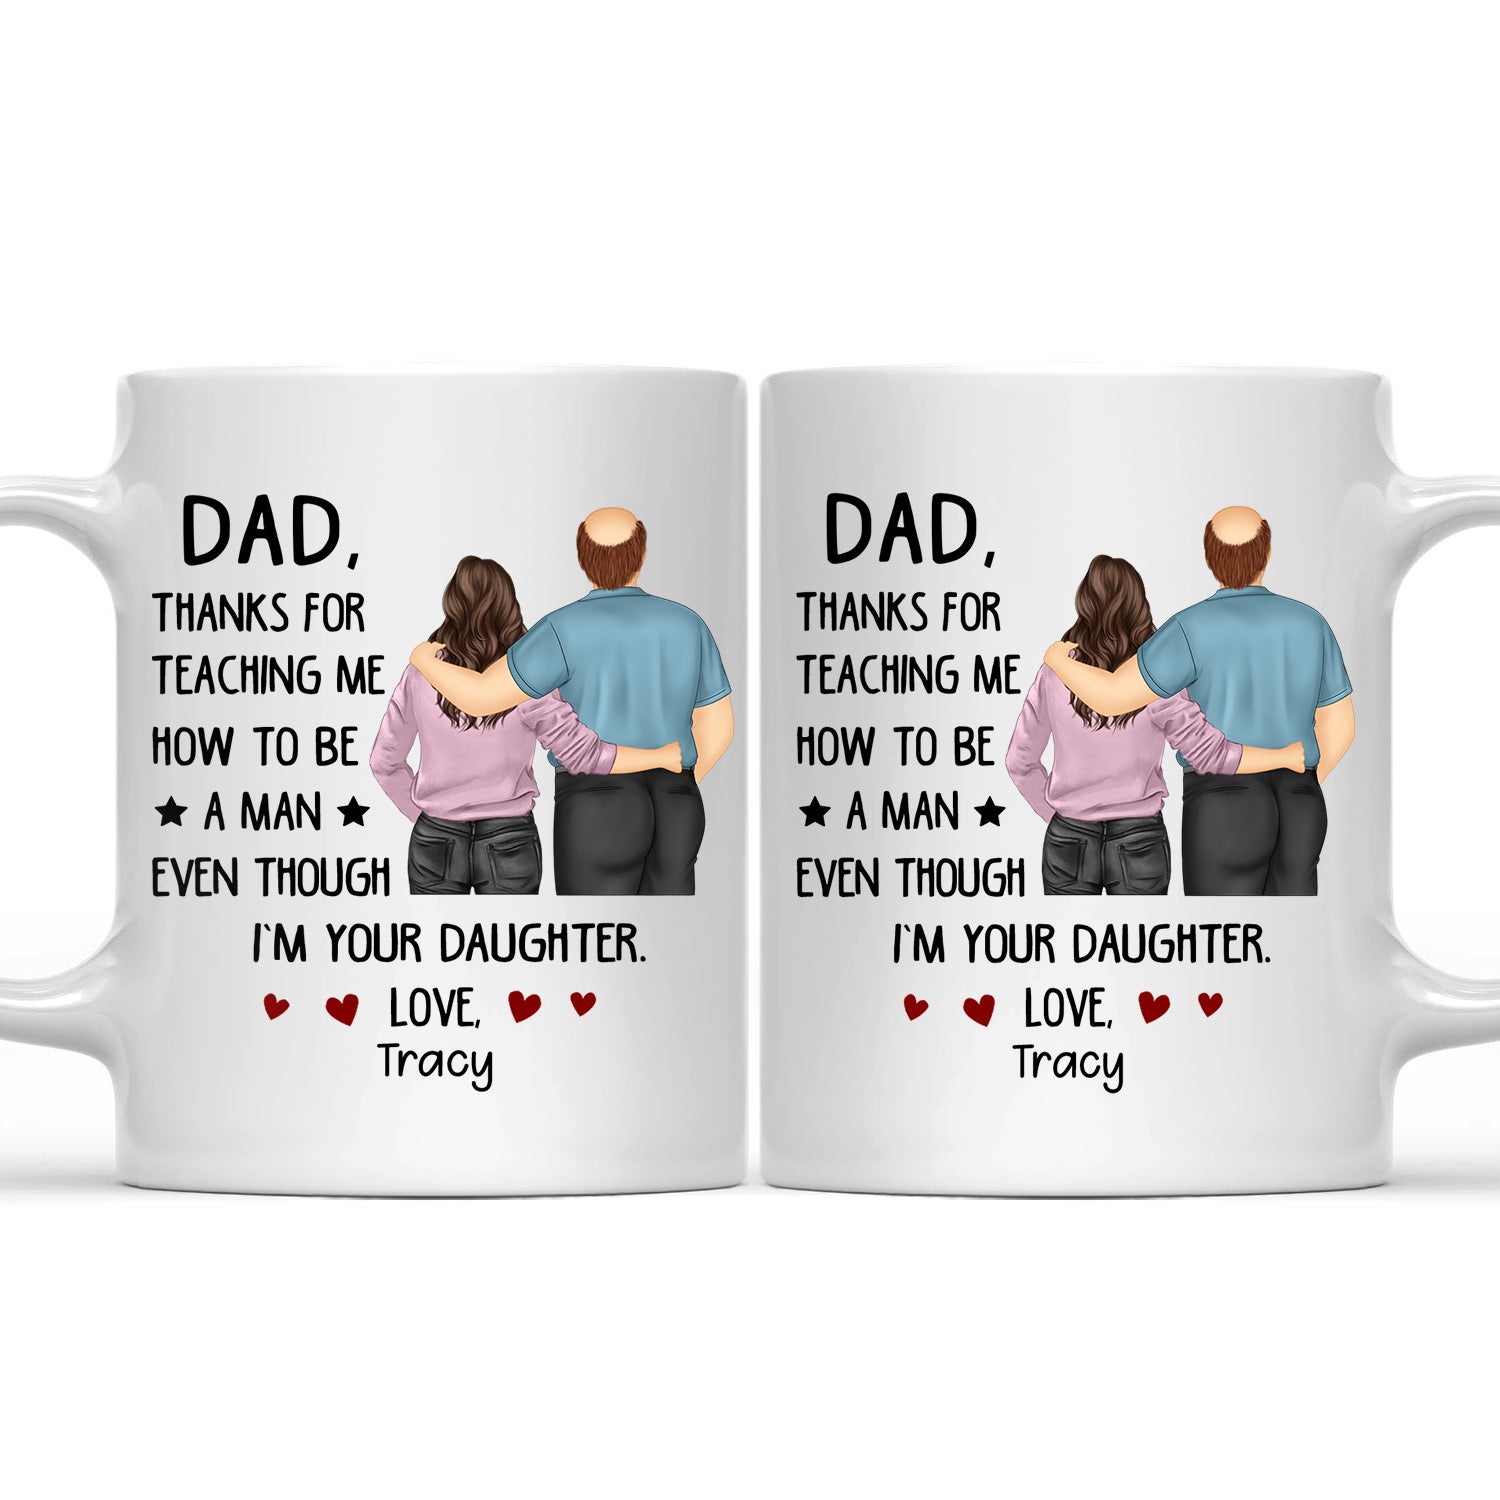 Thanks For Teaching Me Daughter & Dad - Funny Gift For Dad, Father, Grandpa - Personalized Mug